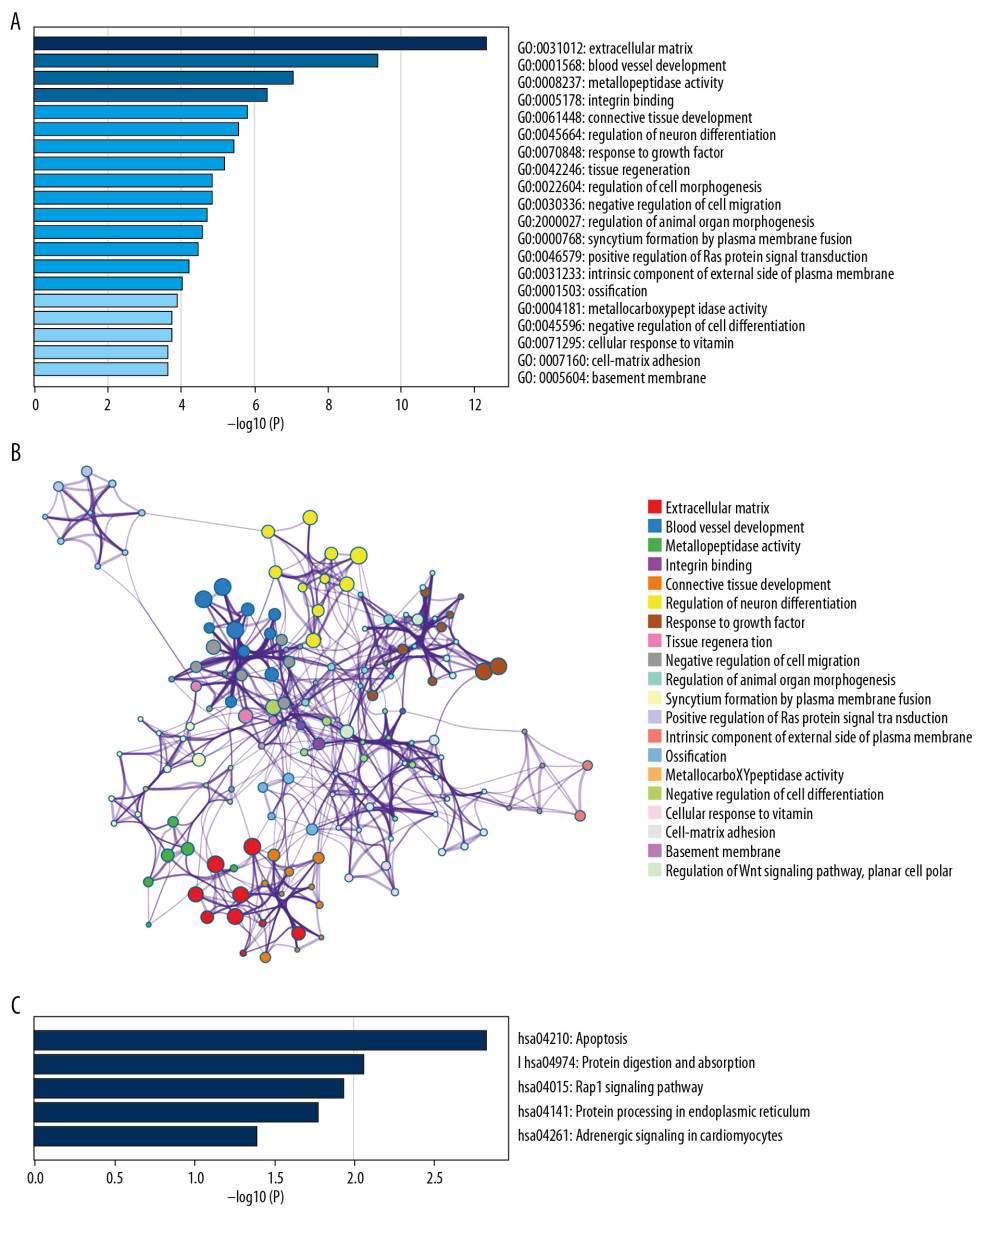 Functional enrichment and pathway analysis of DEGs by Metascape analysis. (A) Top 20 clusters functional enrichment of DEGs. (B) Interconnections between these top 20 clusters functional enrichment terms illustrated with network analysis. Nodes of the same color are representative of same cluster. (C) KEGG pathways of DEGs. KEGG, Kyoto Encyclopedia of Genes and Genomes; DEGs, differentially expressed genes.